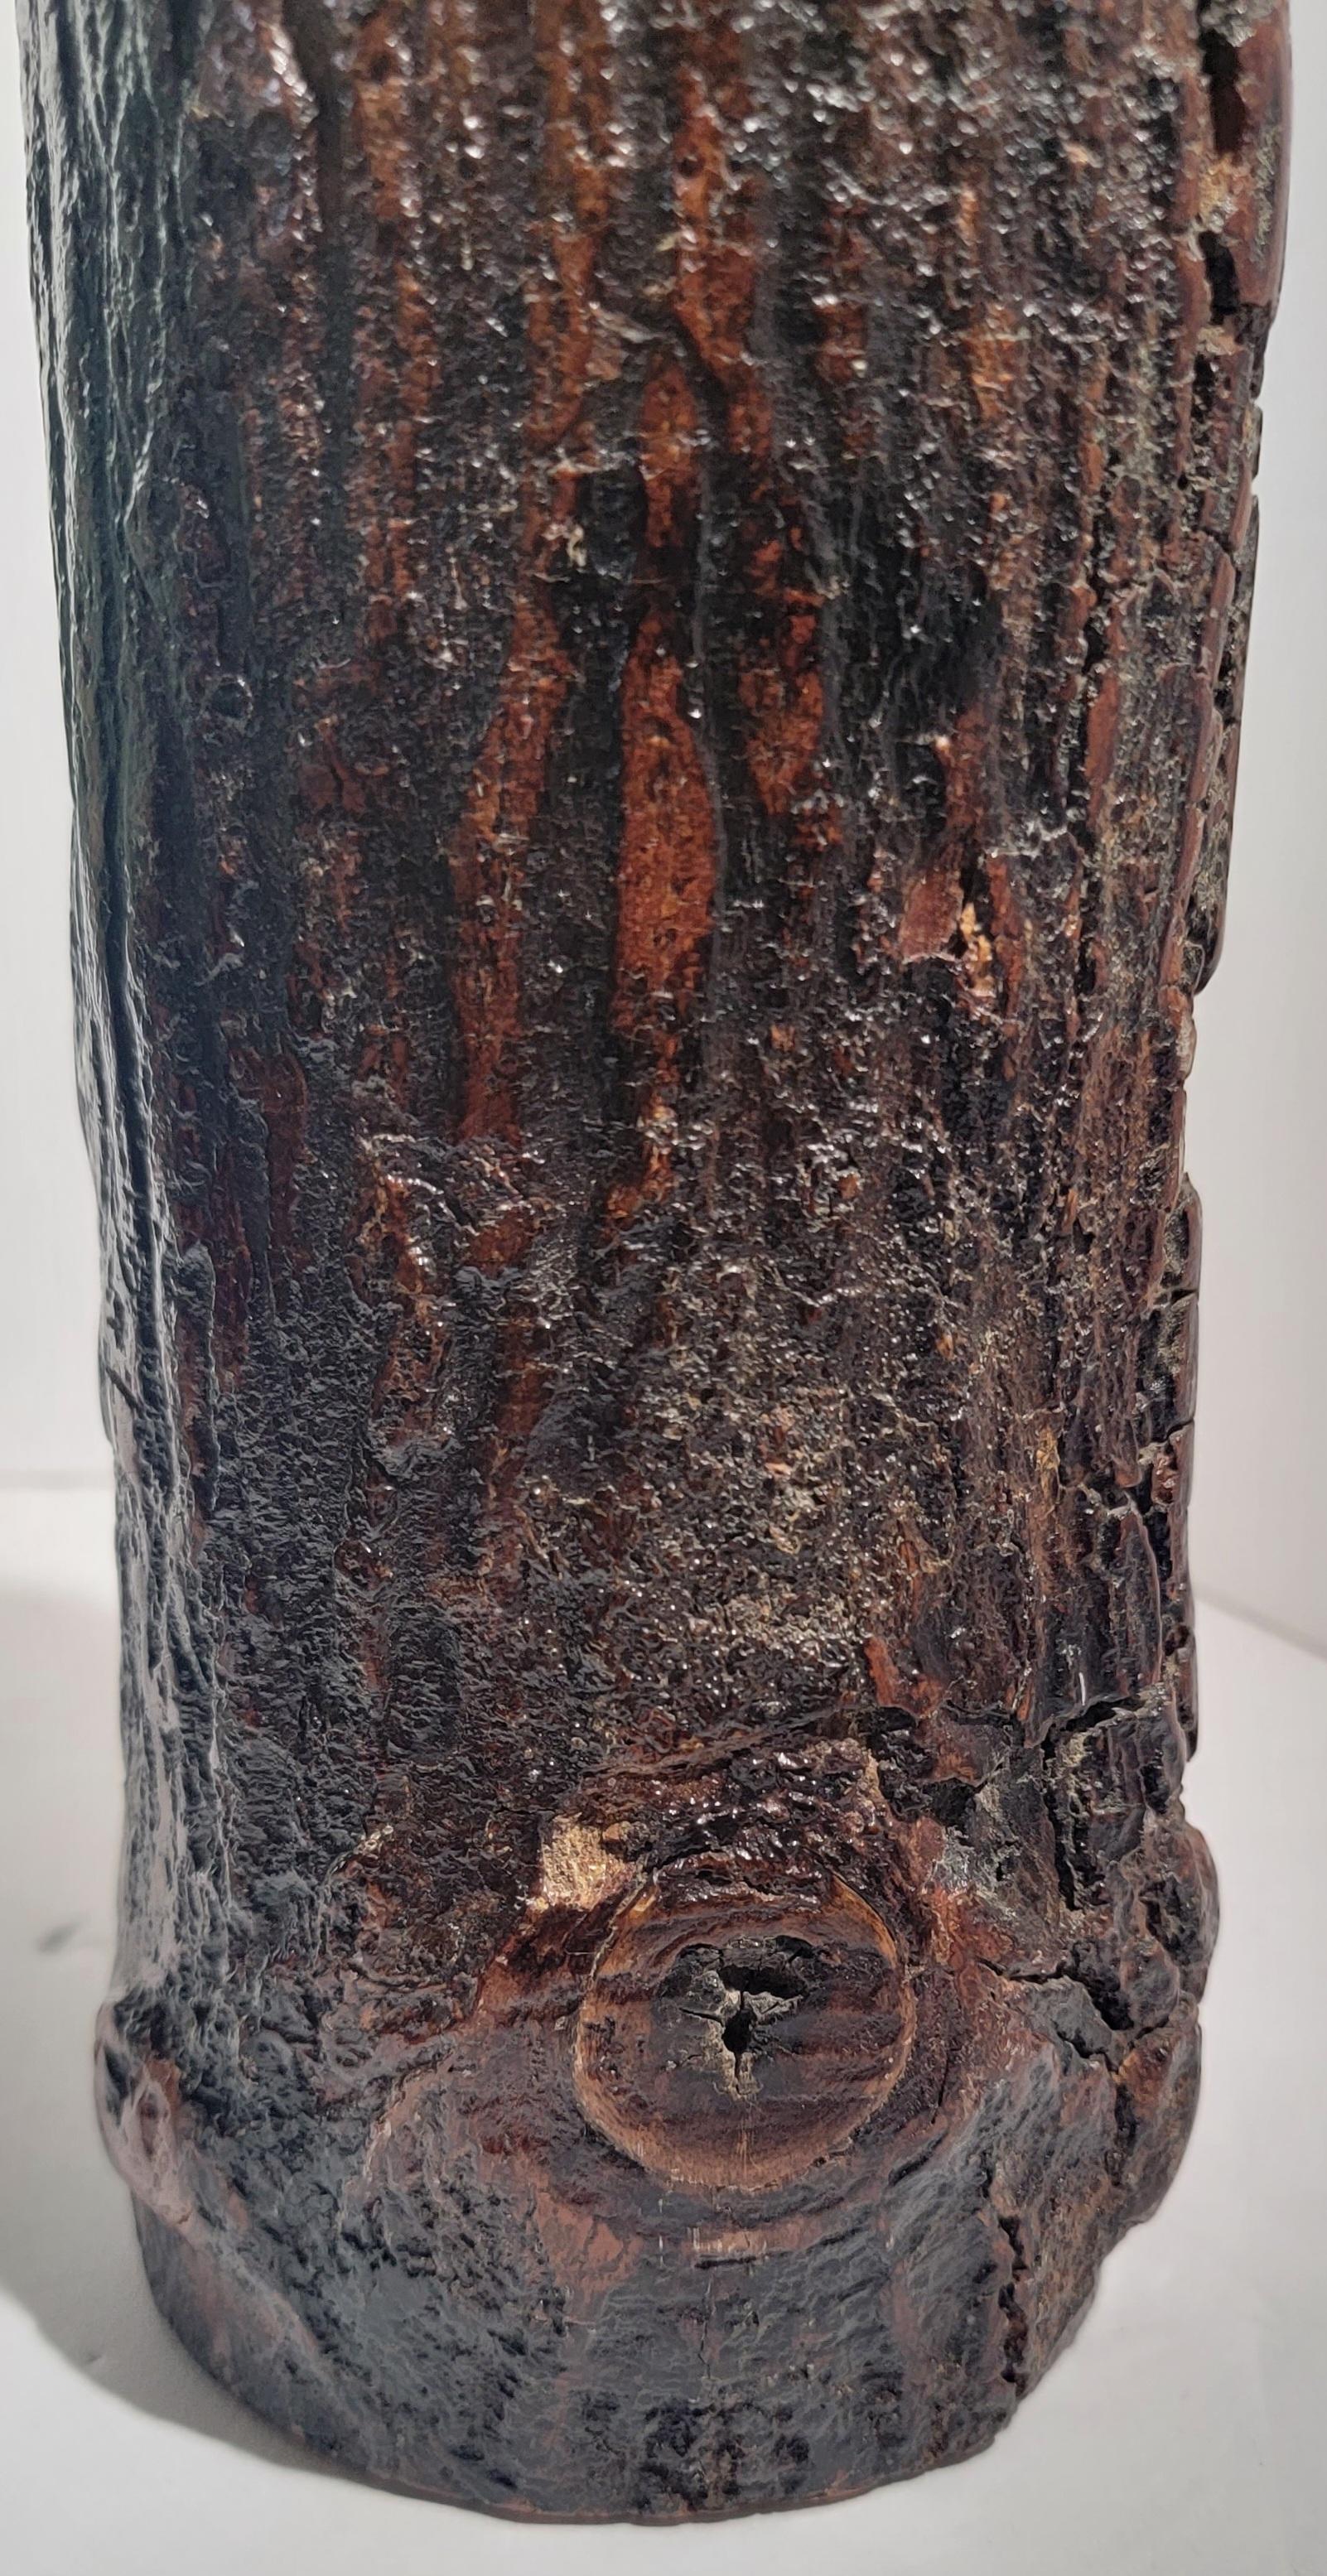 This fine hand carved out mango wood log and in fine condition.The bottom is signed by the artist : CR -MANGO WOOD in fine condition.The patina is amazing.